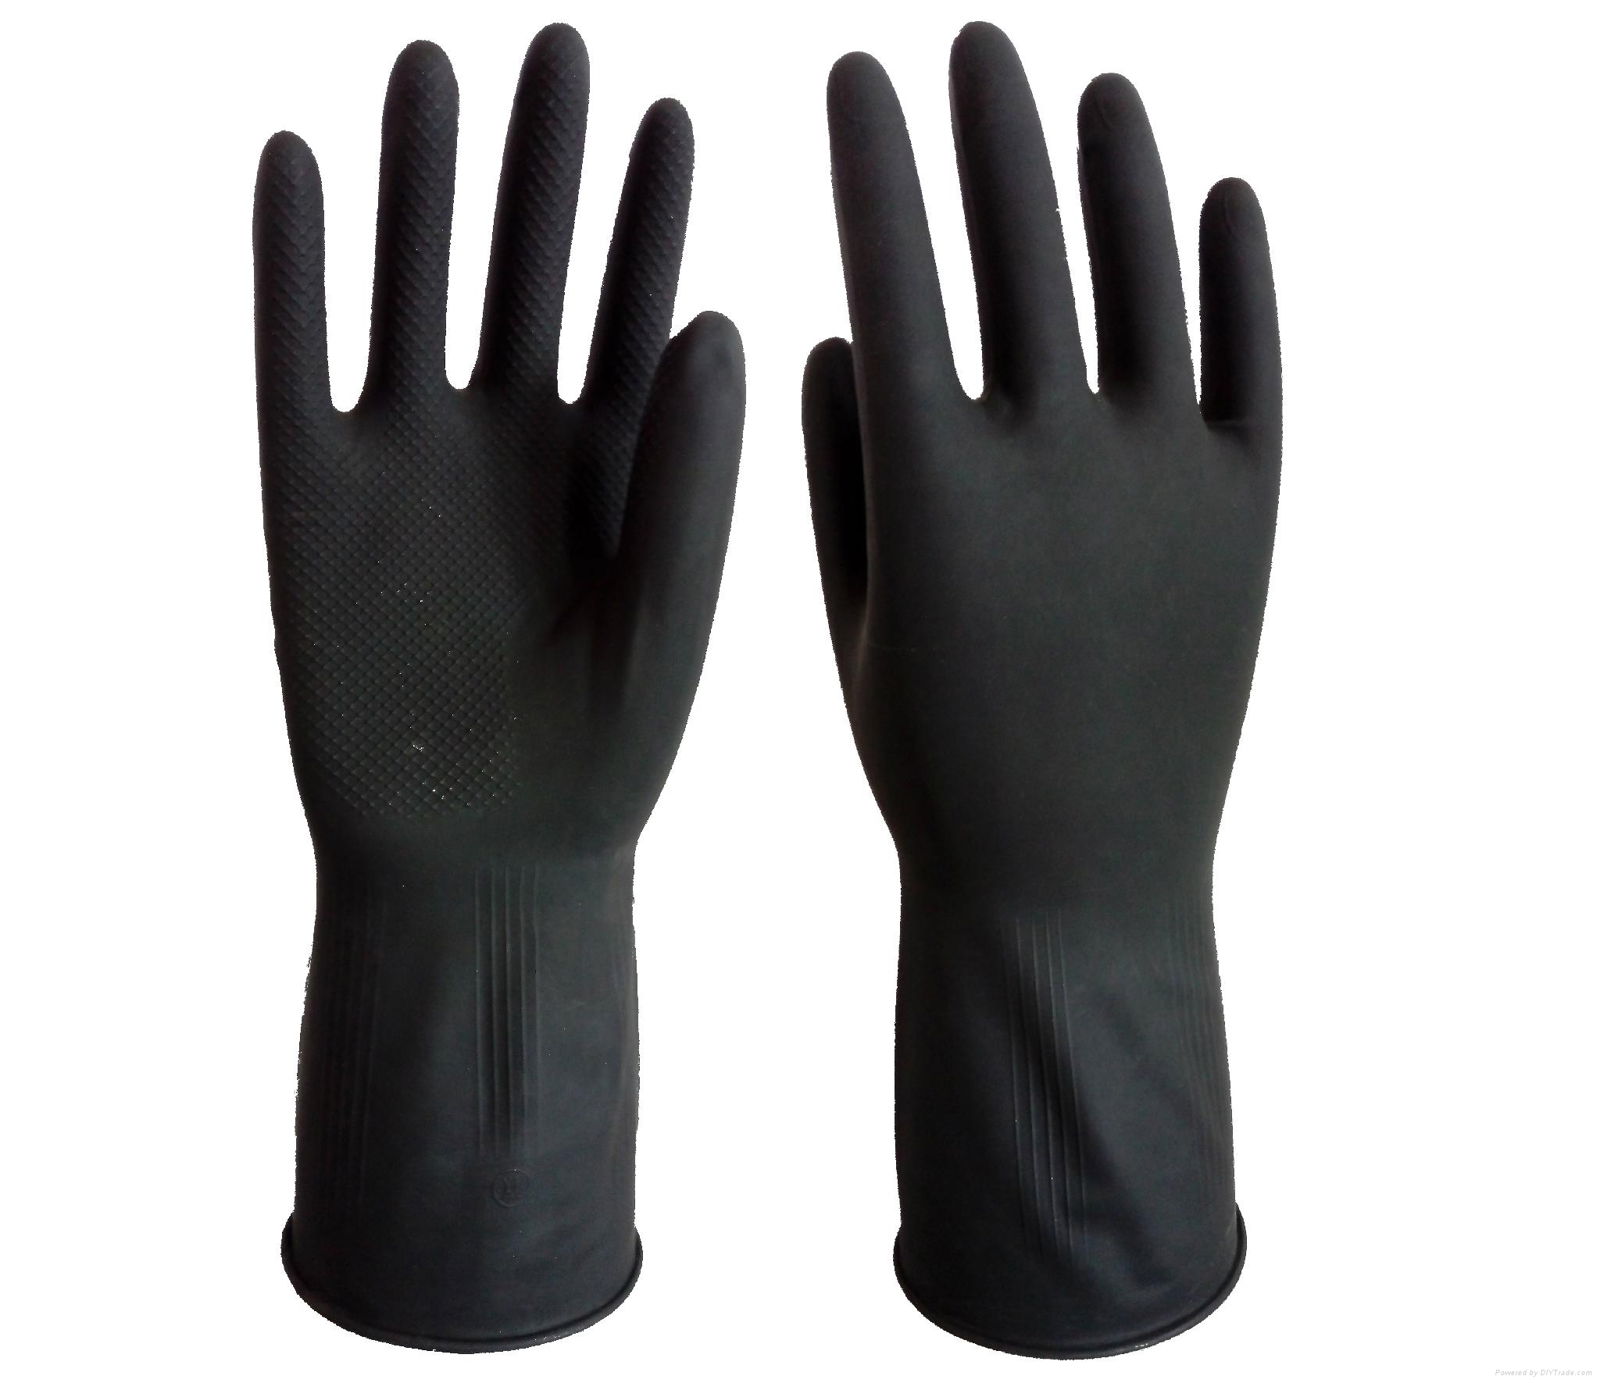 Industrial latex gloves / black and orange color latex gloves